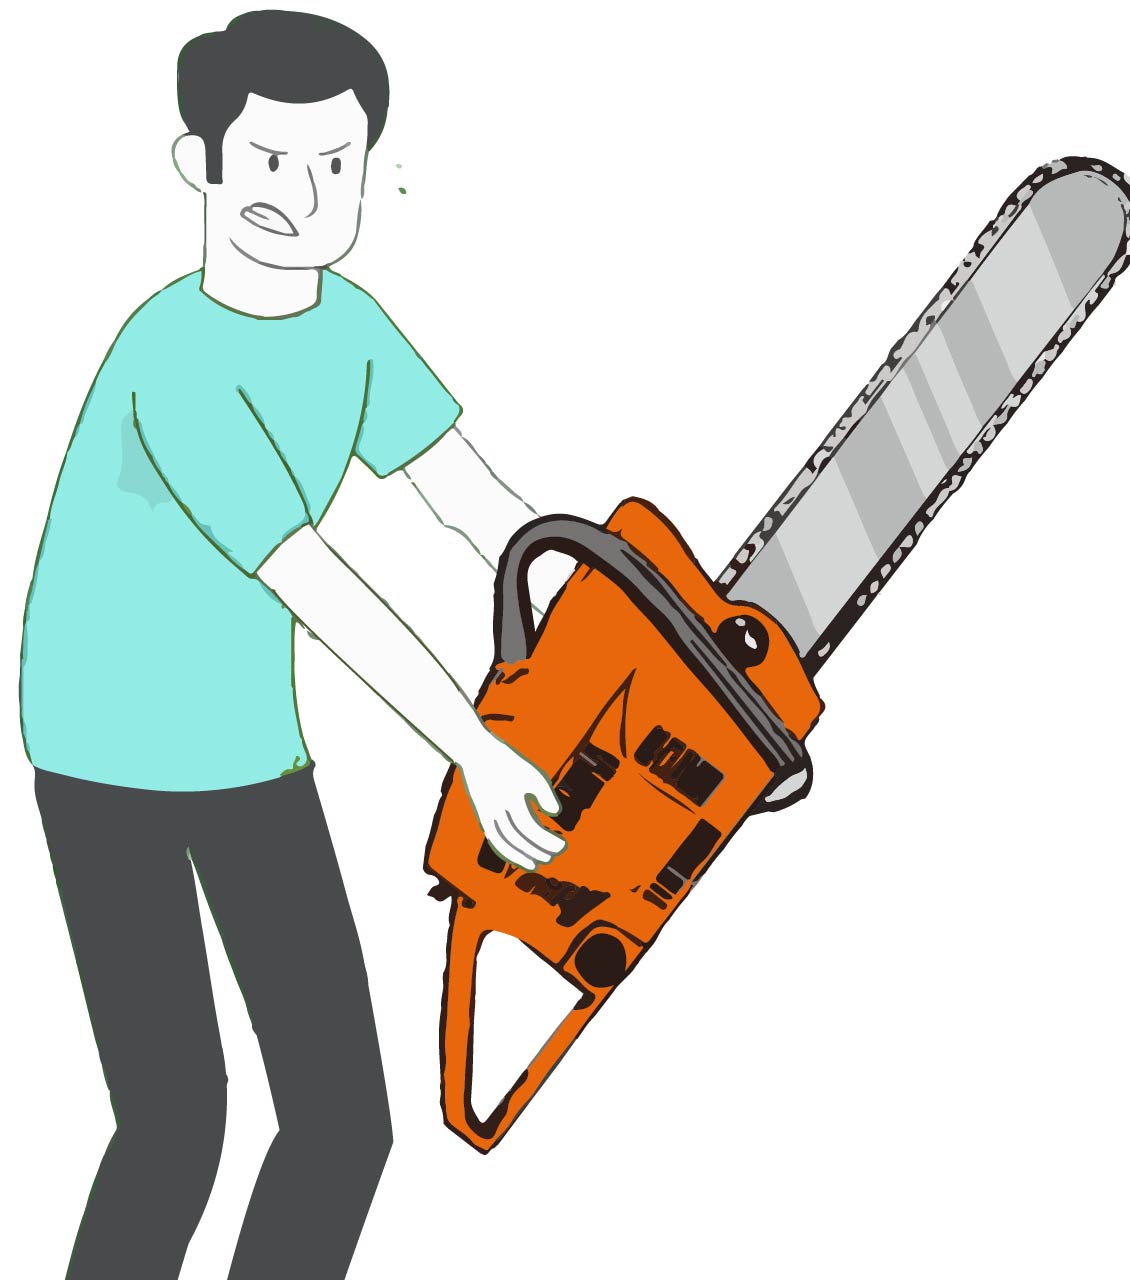 Chainsaw Removal & Disposal Services